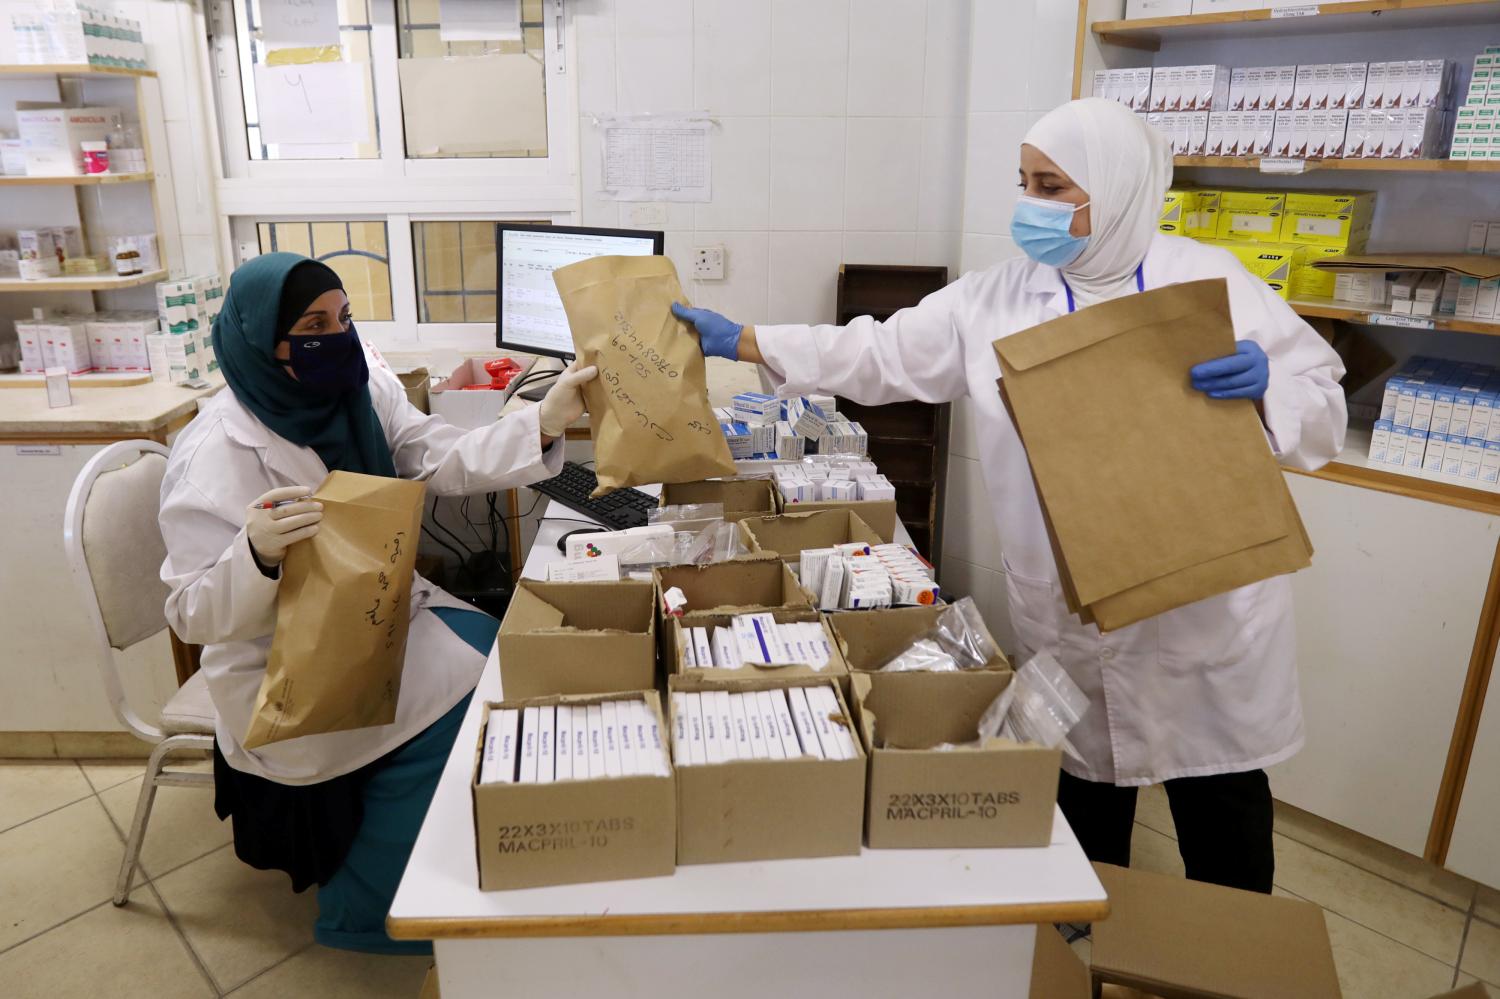 Members of the medical staff at UNRWA prepare prescription medicines to deliver to Palestinian refugees in their homes at Amman New camp (Al-Wehdat camp) amid concerns over the spread of the coronavirus disease (COVID-19), in Amman, Jordan April 15, 2020. Picture taken April 15, 2020. REUTERS/Muhammad Hamed